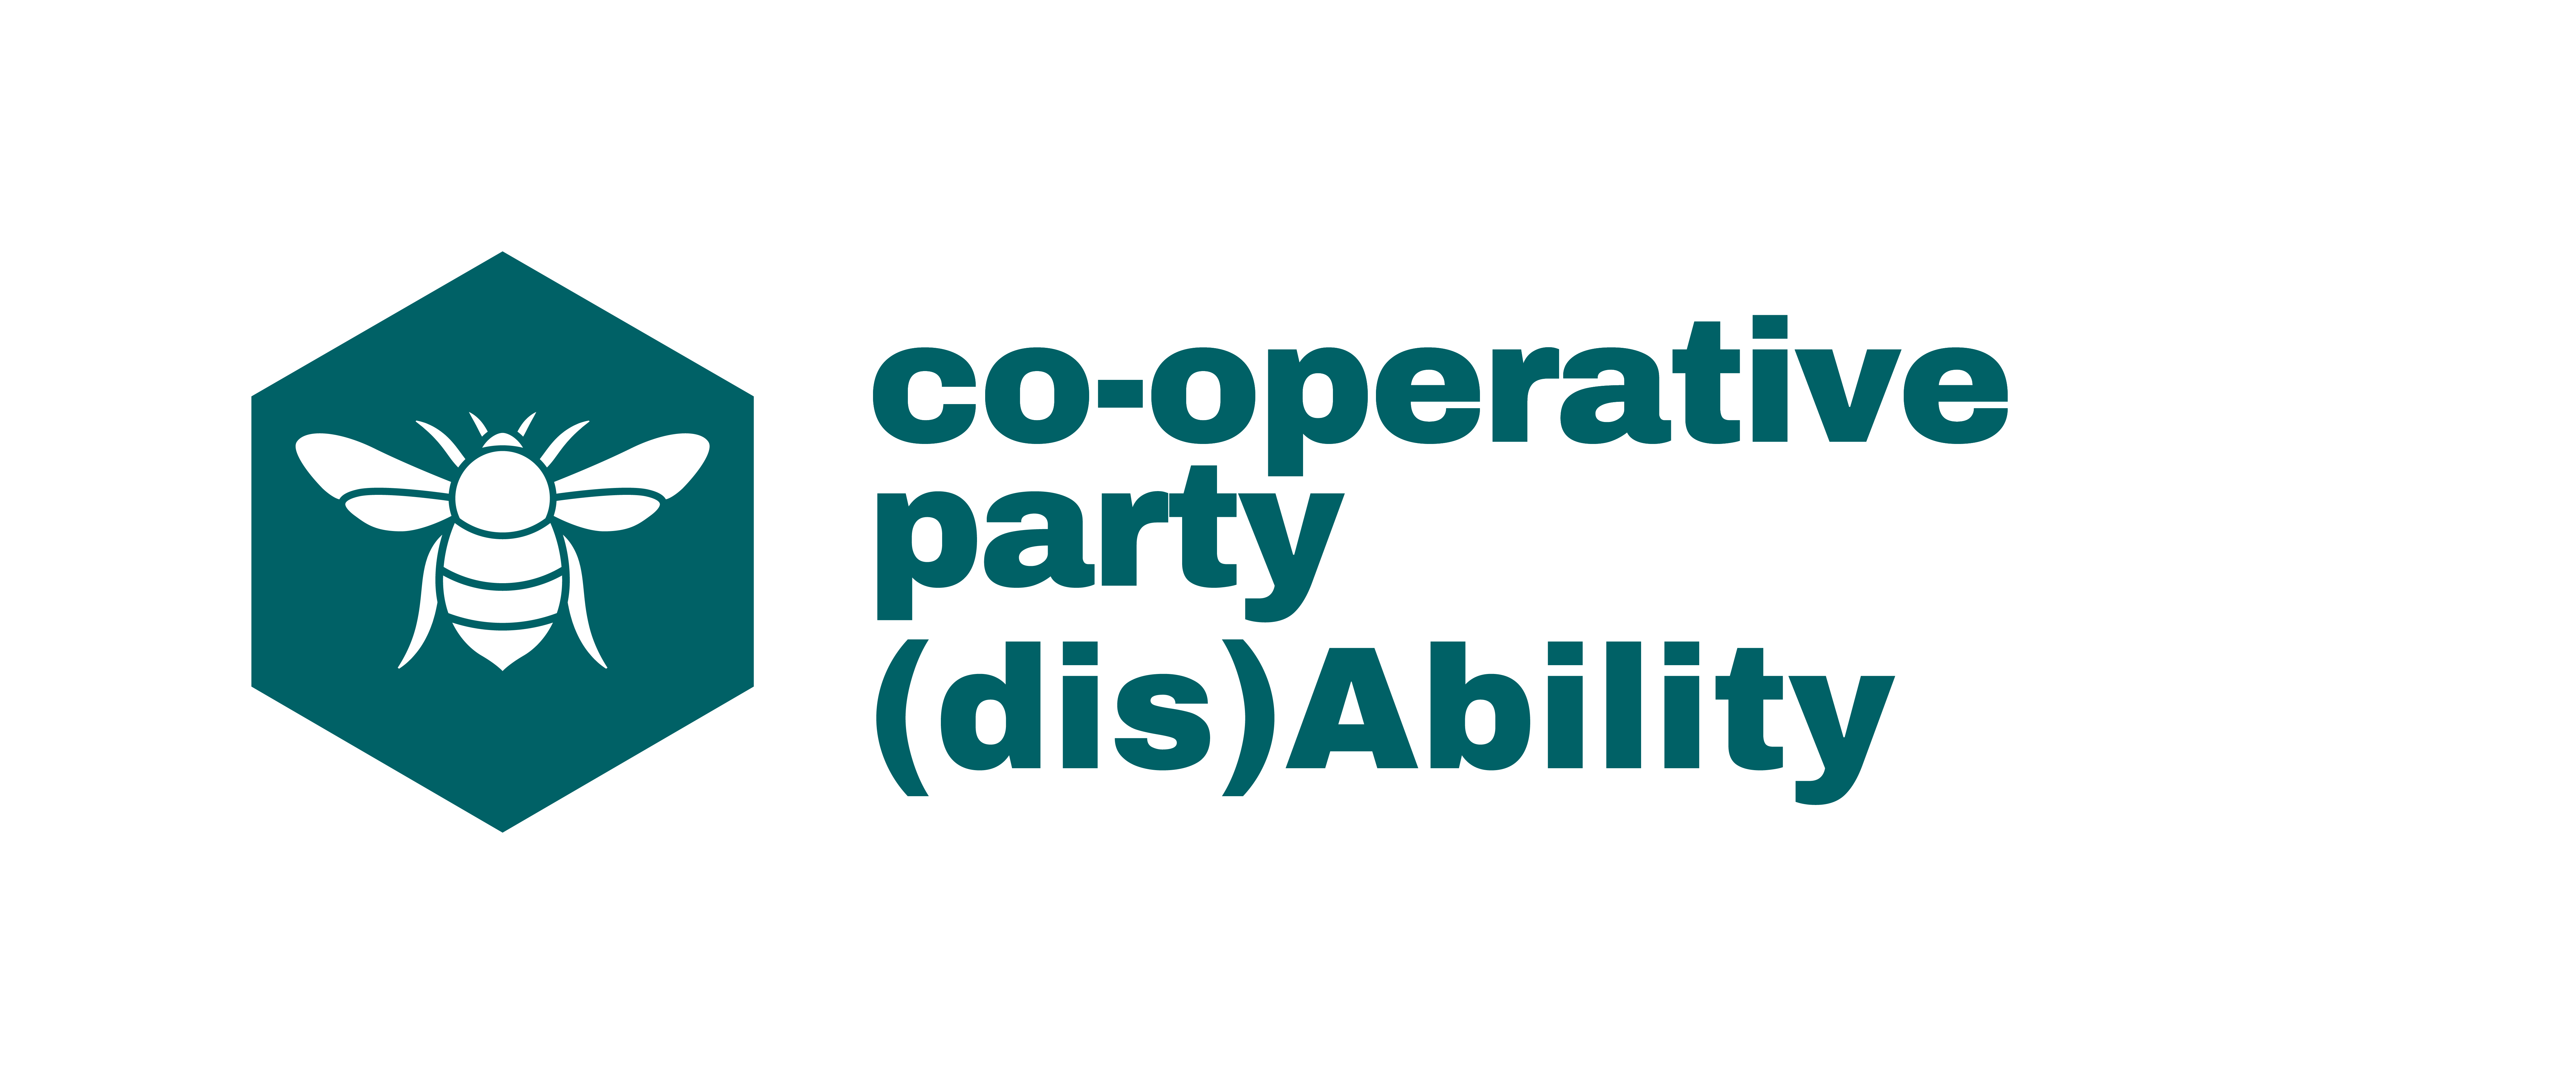 coopparty-disability-teal@4x